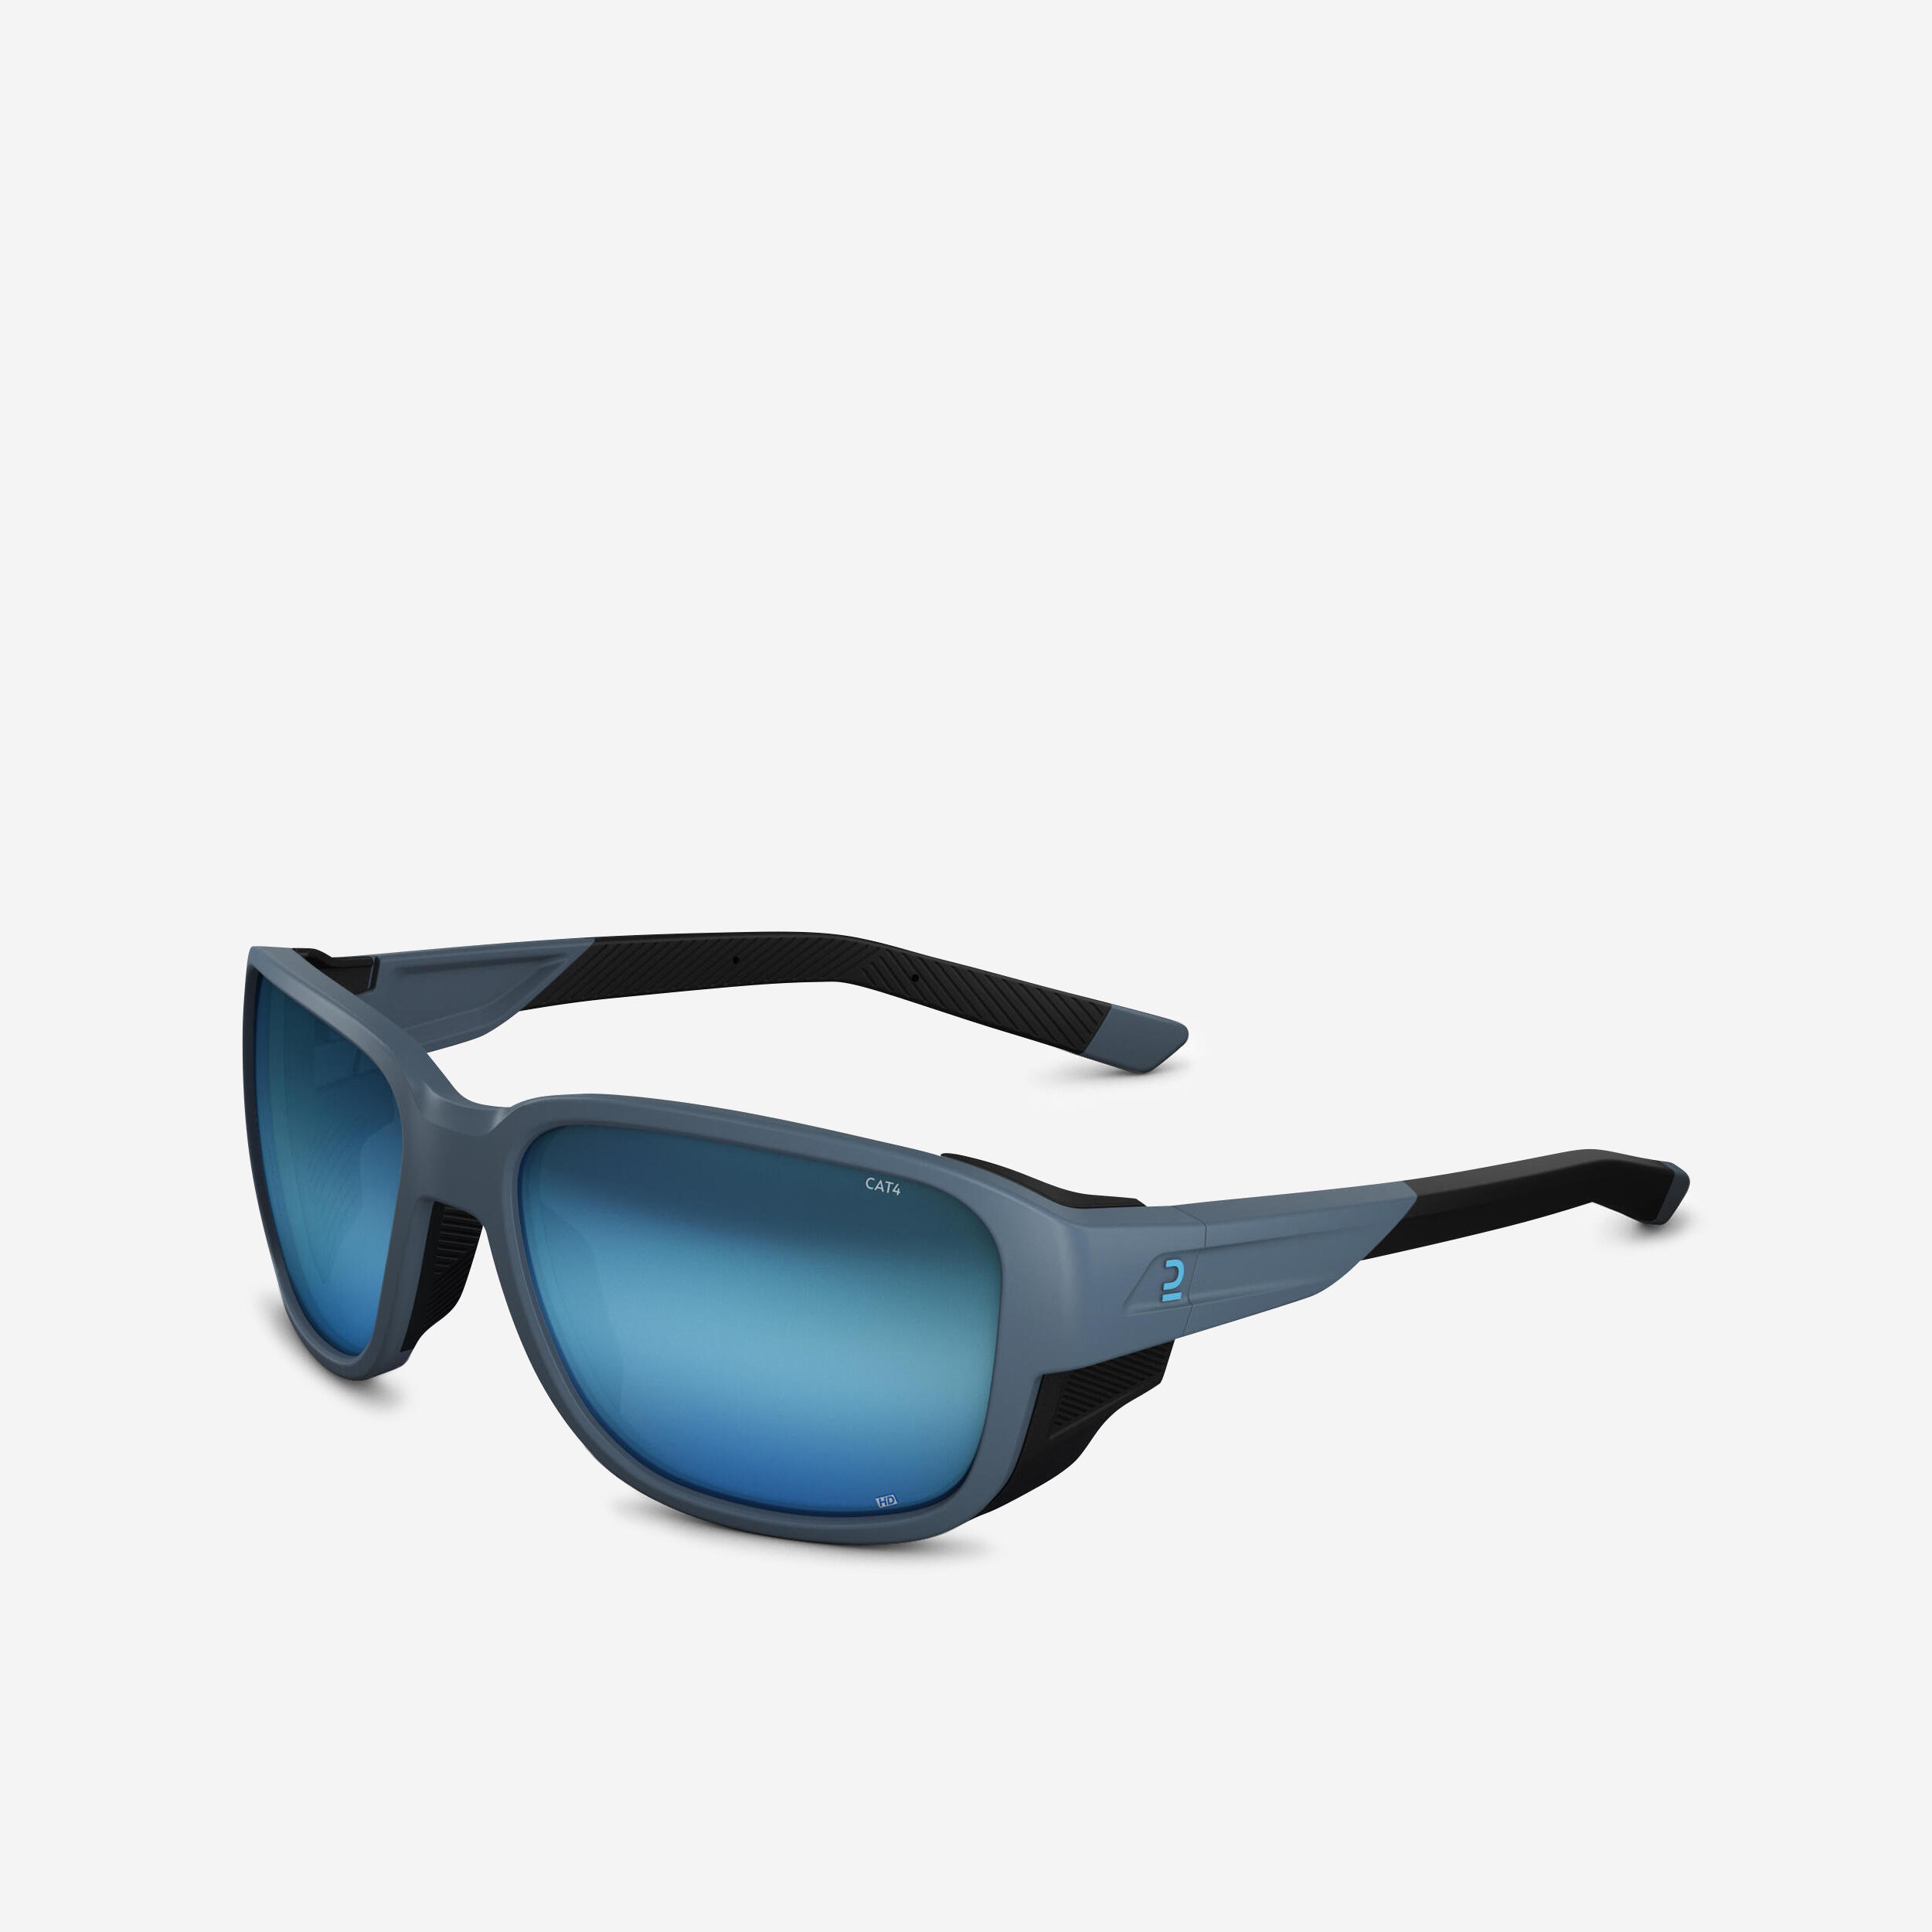 Hiking Category 4 Sunglasses - MH 570 Grey